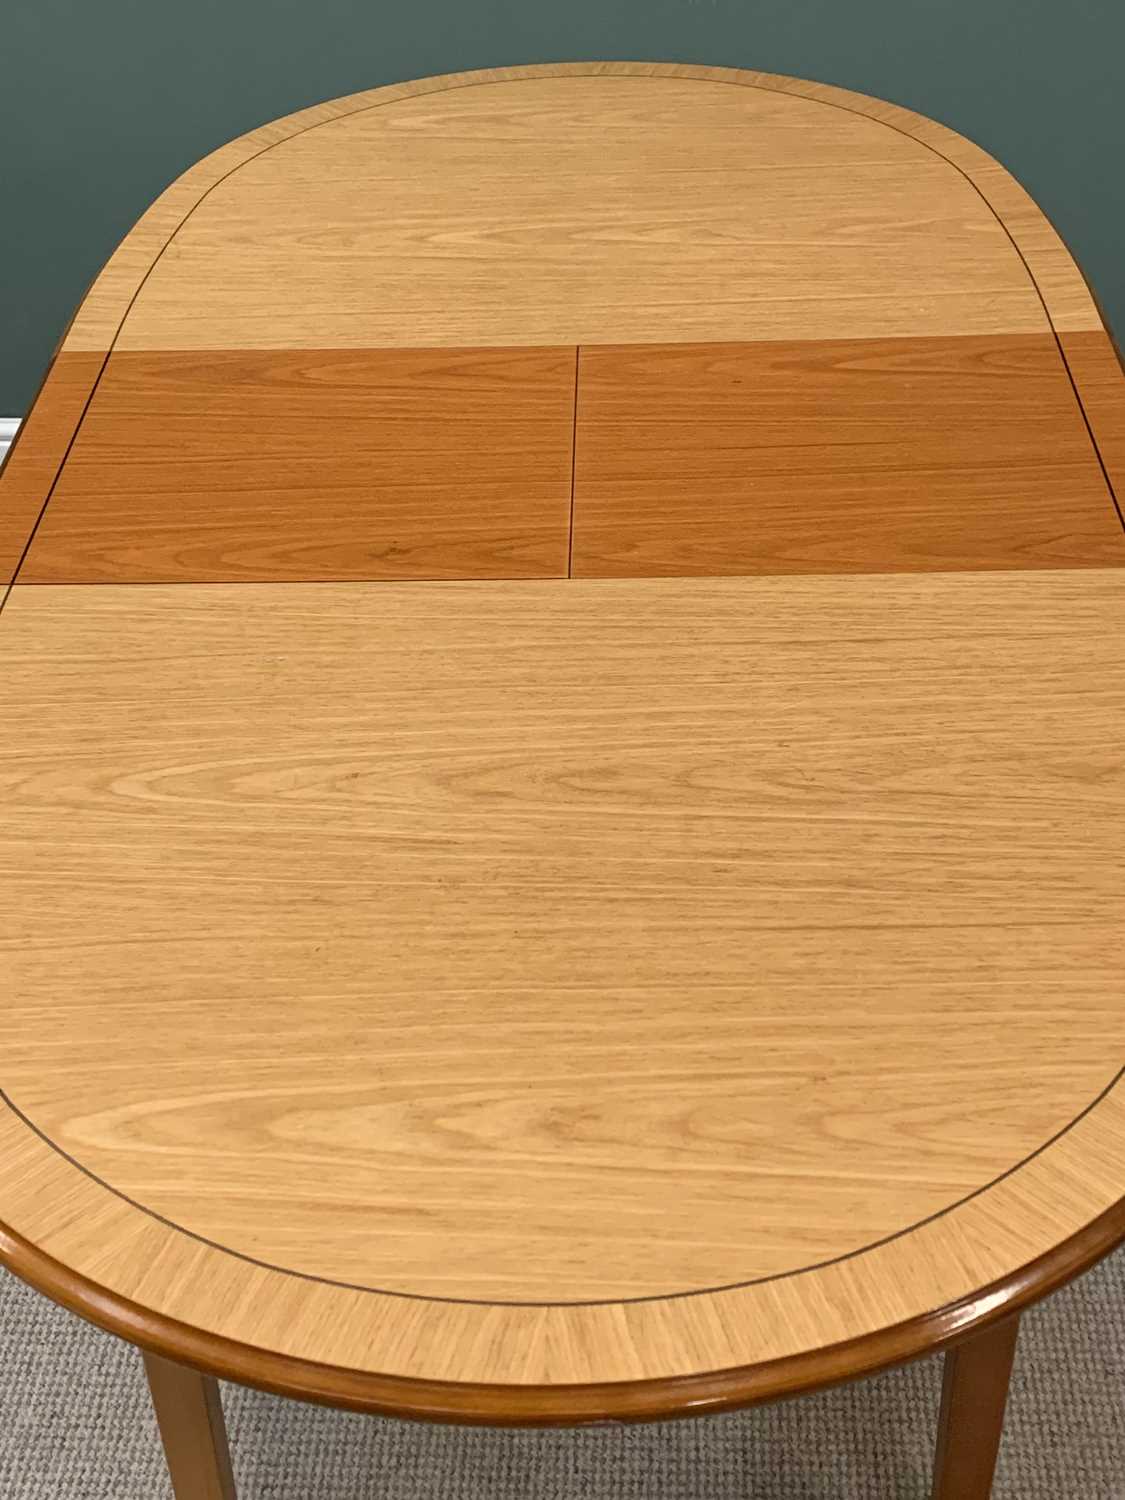 MODERN LIGHT WOOD EXTENDING DINING TABLE, 74cms H, 95cms W, 183cms D and a SET OF SIX SLATTED - Image 5 of 6